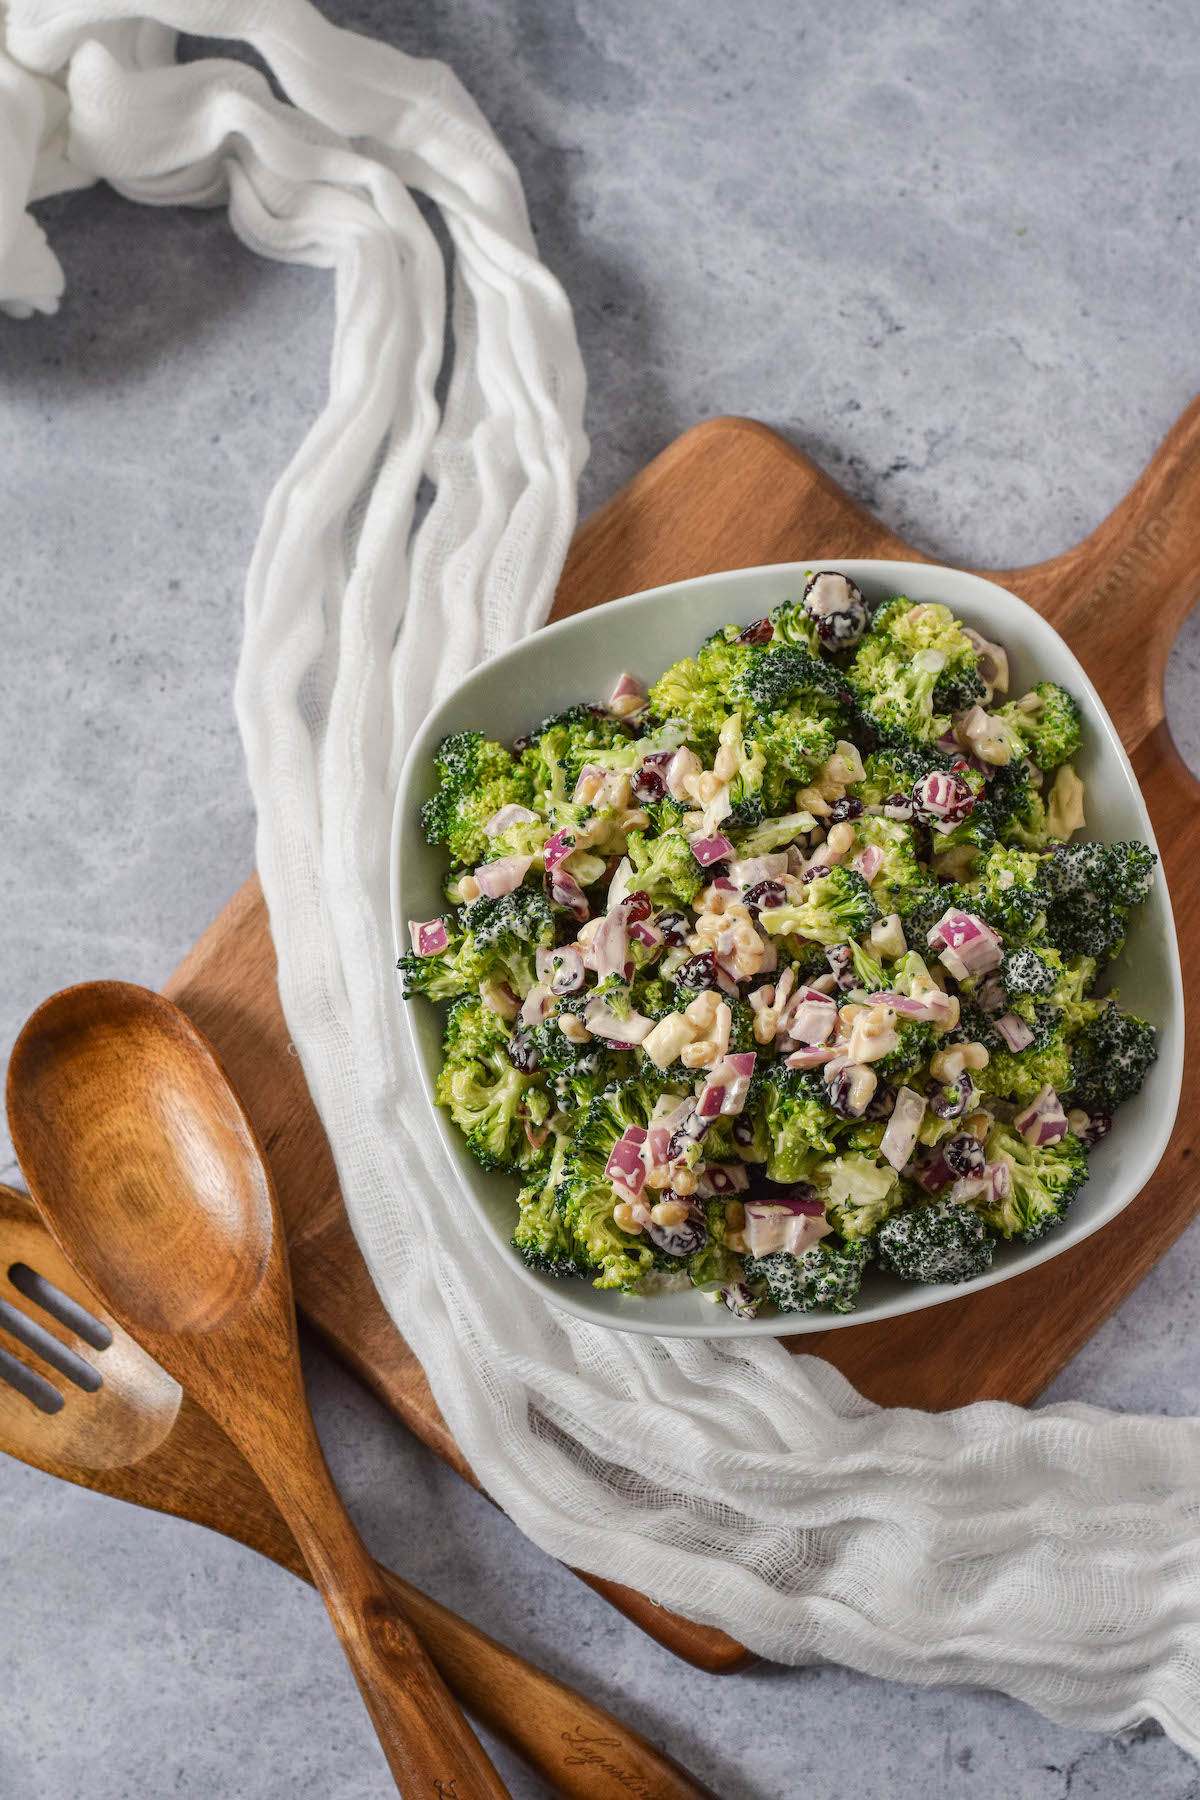 top view of broccoli salad in a white bowl on a wooden cutting board